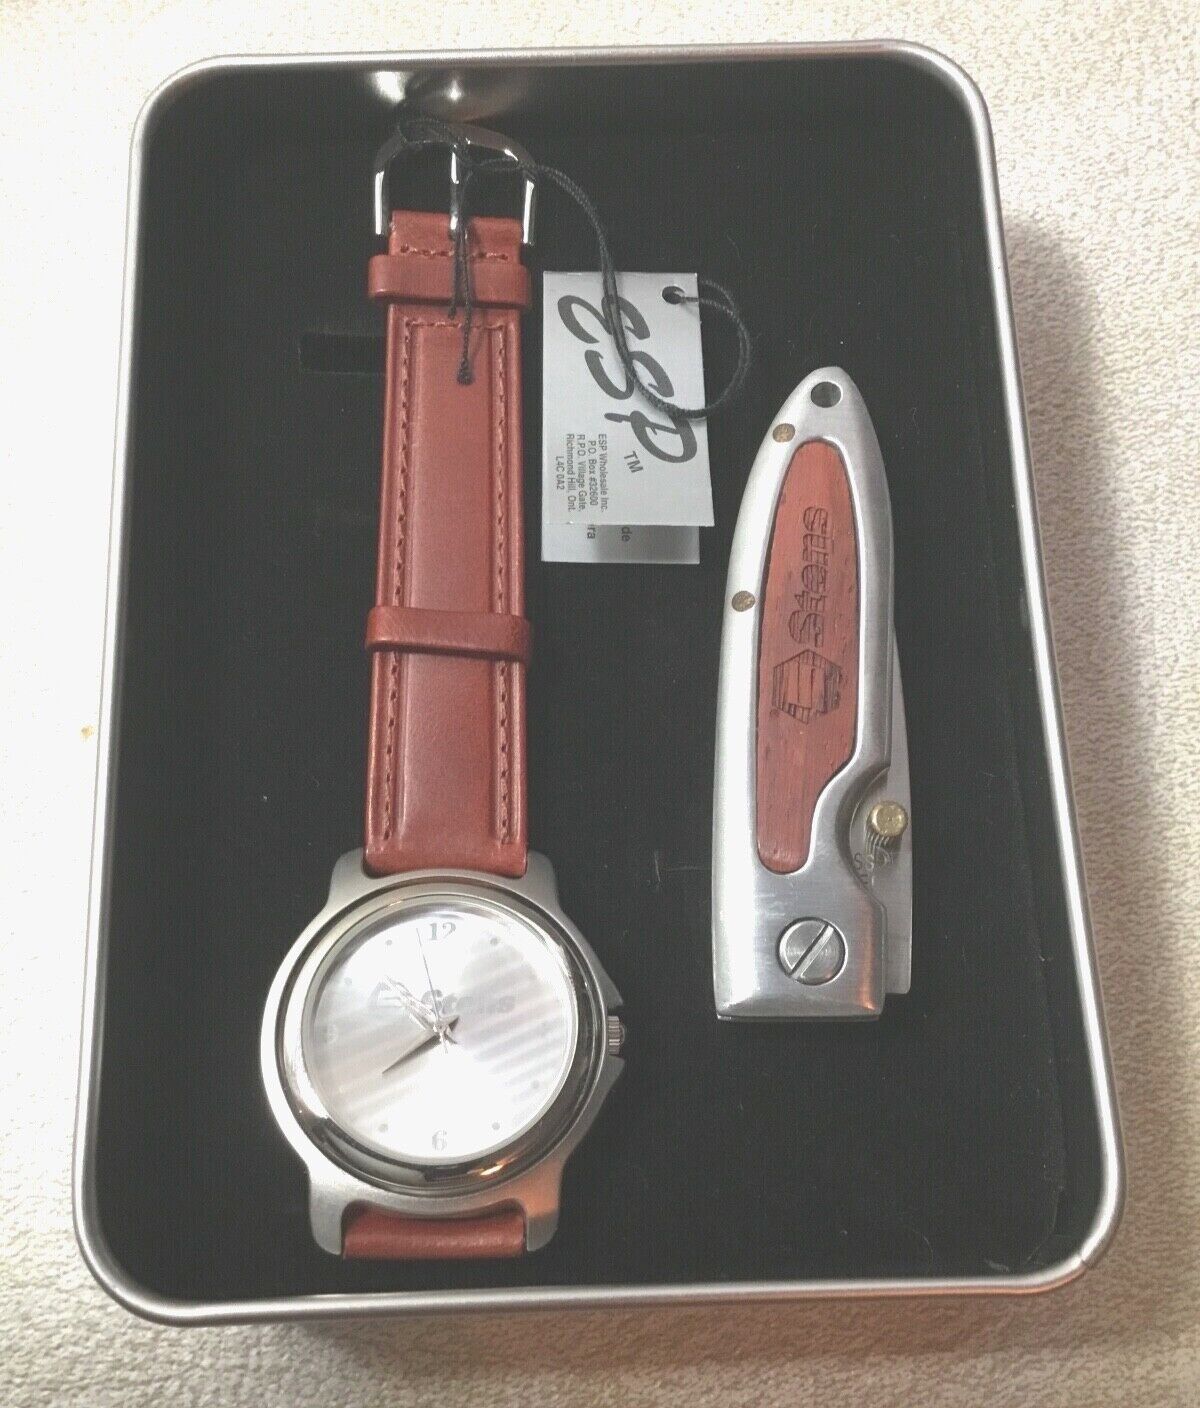 STENS watch and pocket knife set by ESP Bienne- NEW!